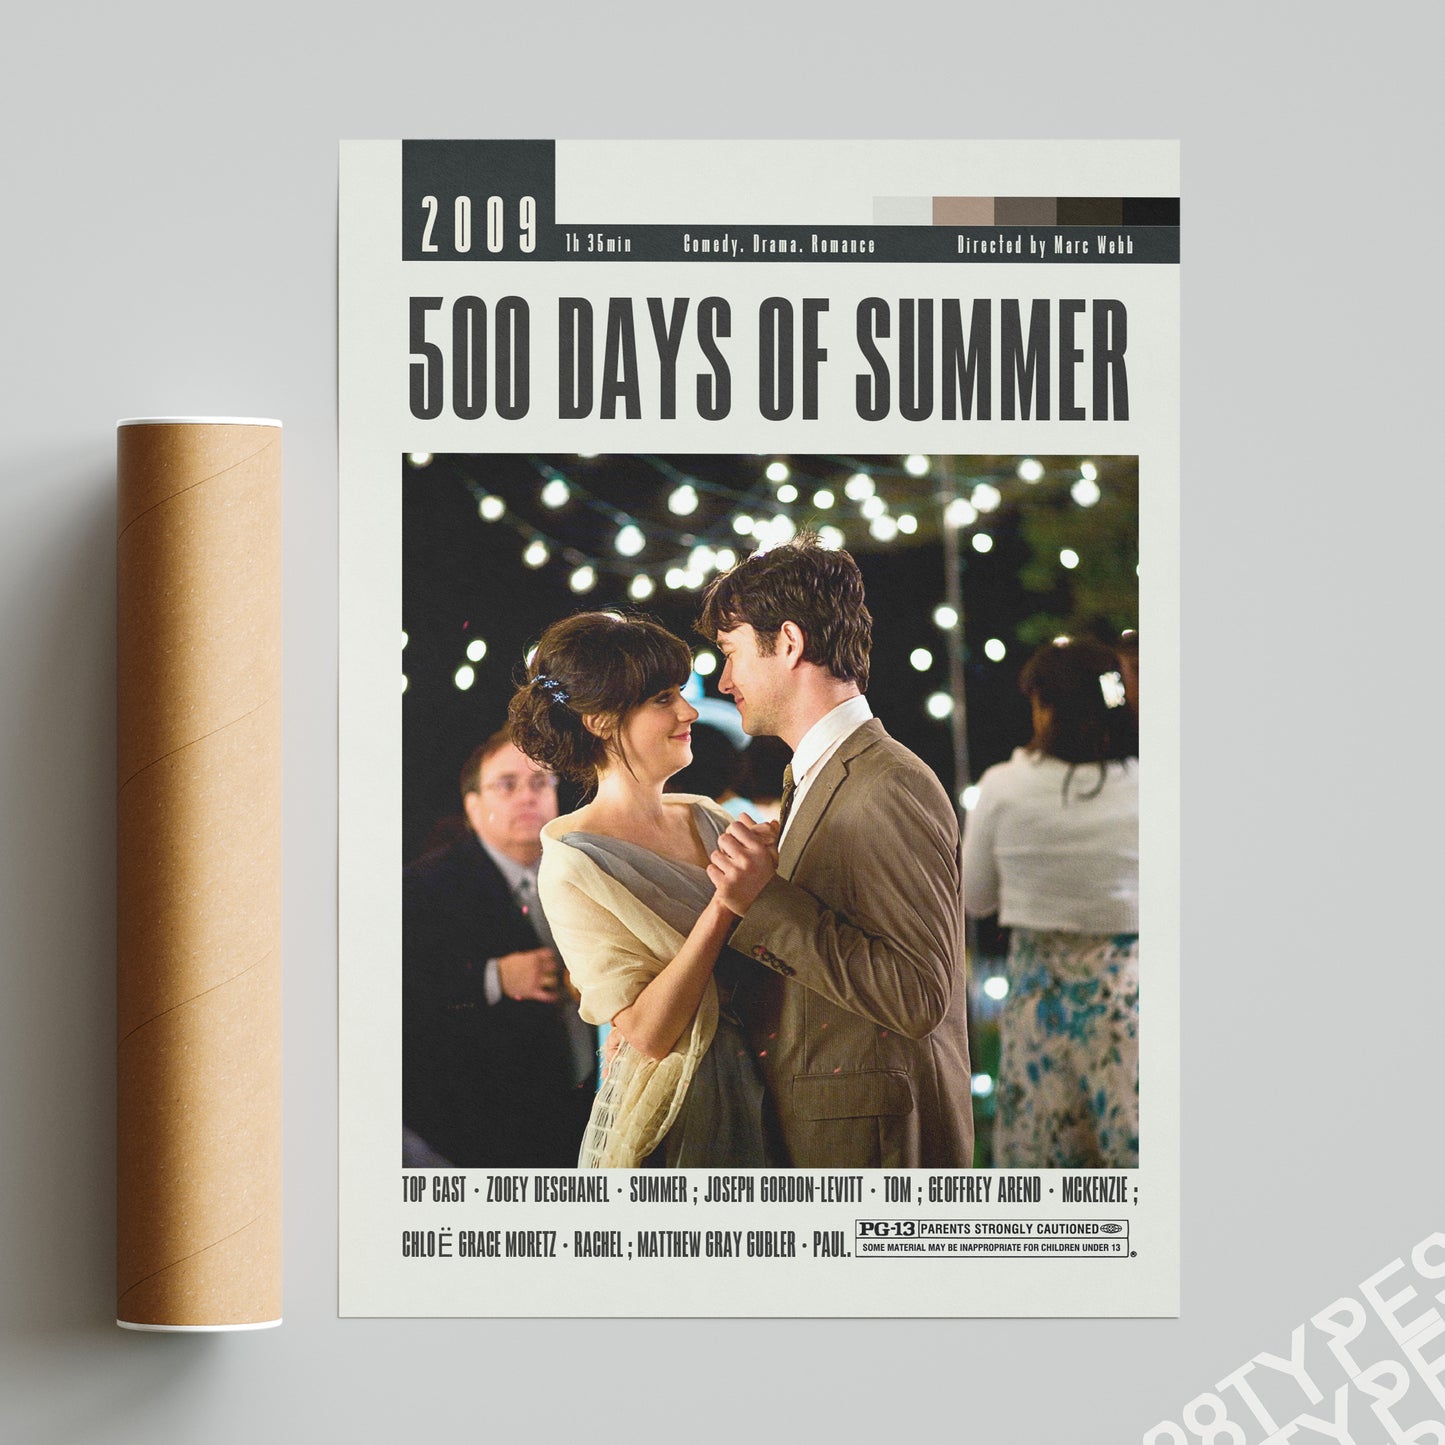 Enhance your movie collection with the 500 Days of Summer poster by Marc Webb. Featuring a sleek, minimalist design, this vintage retro art print will make for a stunning addition to your wall decor. Available in various sizes, this custom movie poster showcases the top cast, duration, and famous scene, all of which make it one of the best movies of all time.